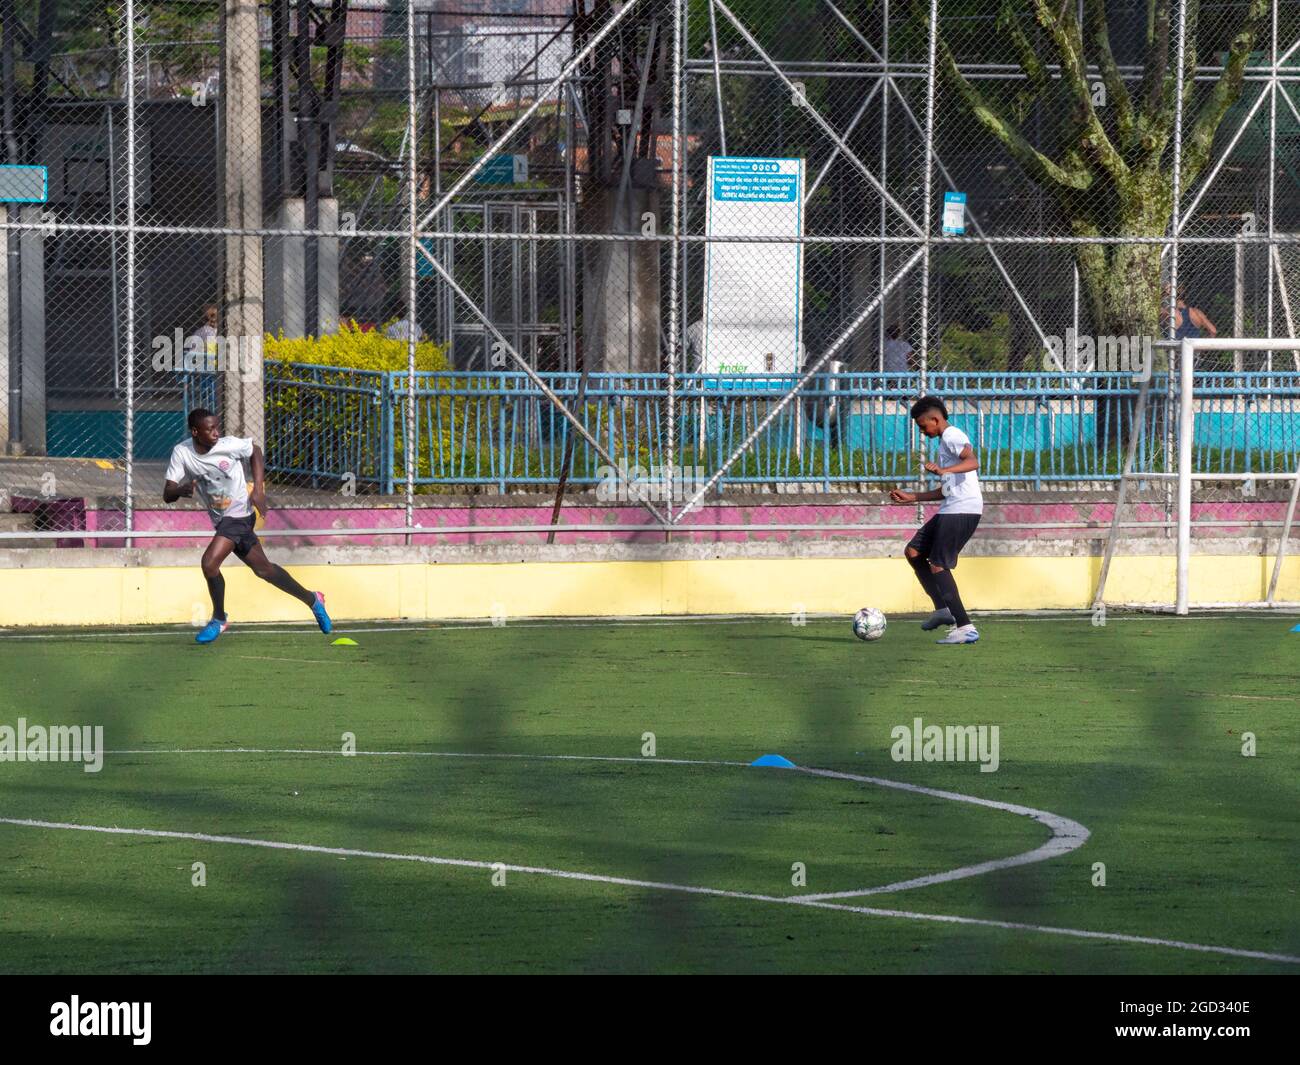 Medellin, Colombia - July 30 2021: Two Young Latin Teenagers in Sportswear Training Soccer with Several Balls on a Sunny Day Stock Photo